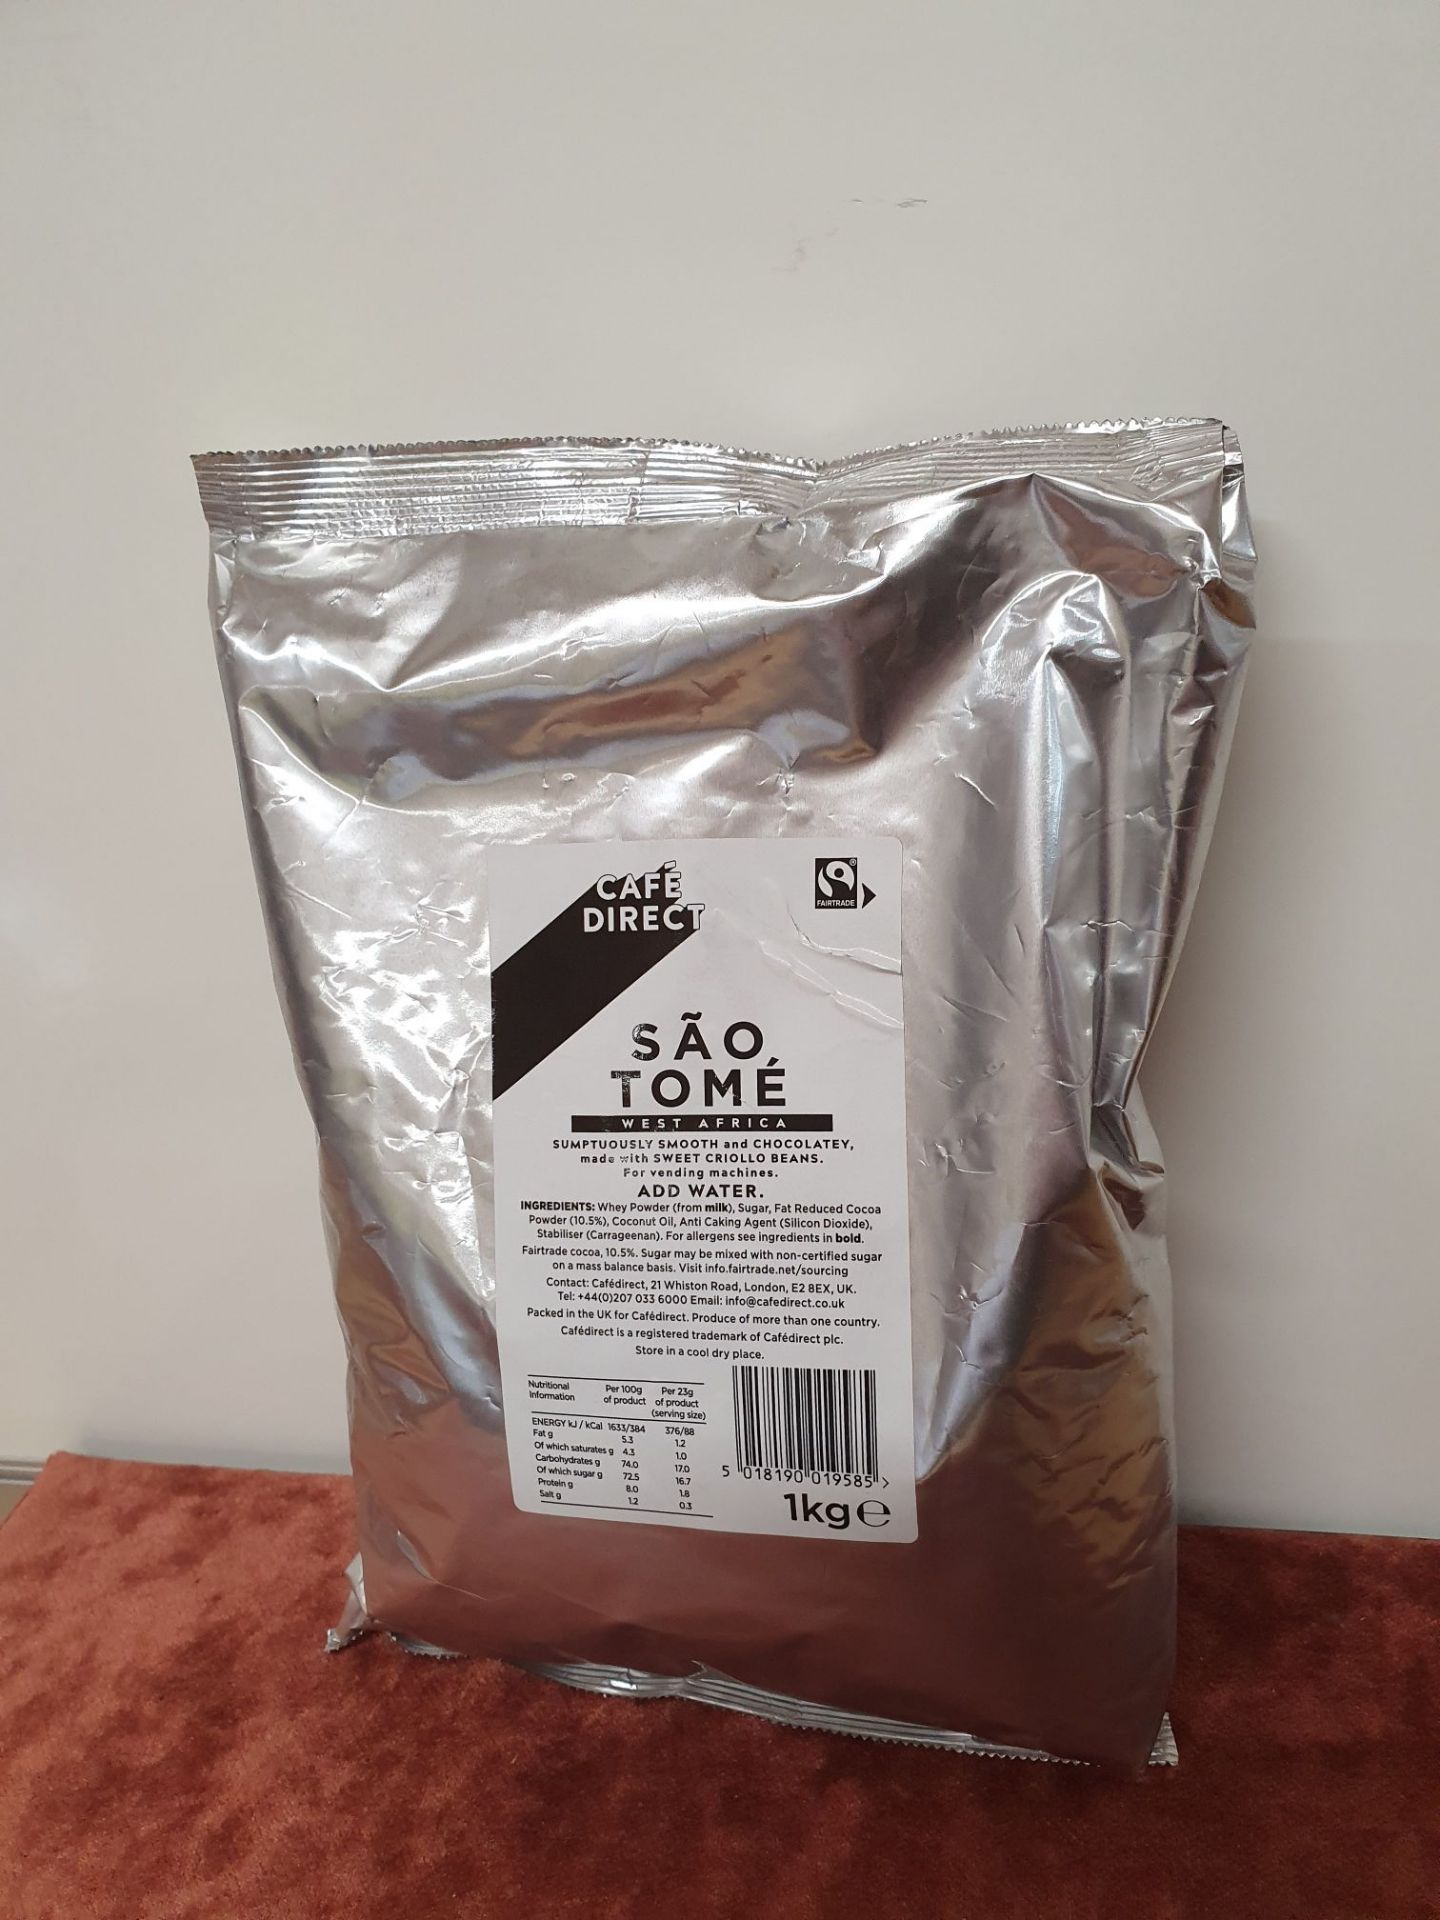 ONE LOT TO CONTAIN ONE CAFÉ DIRECT SAO TOME INSTANT HOT CHOCOLATE - 1KG. BEST BEFORE MARCH 2021